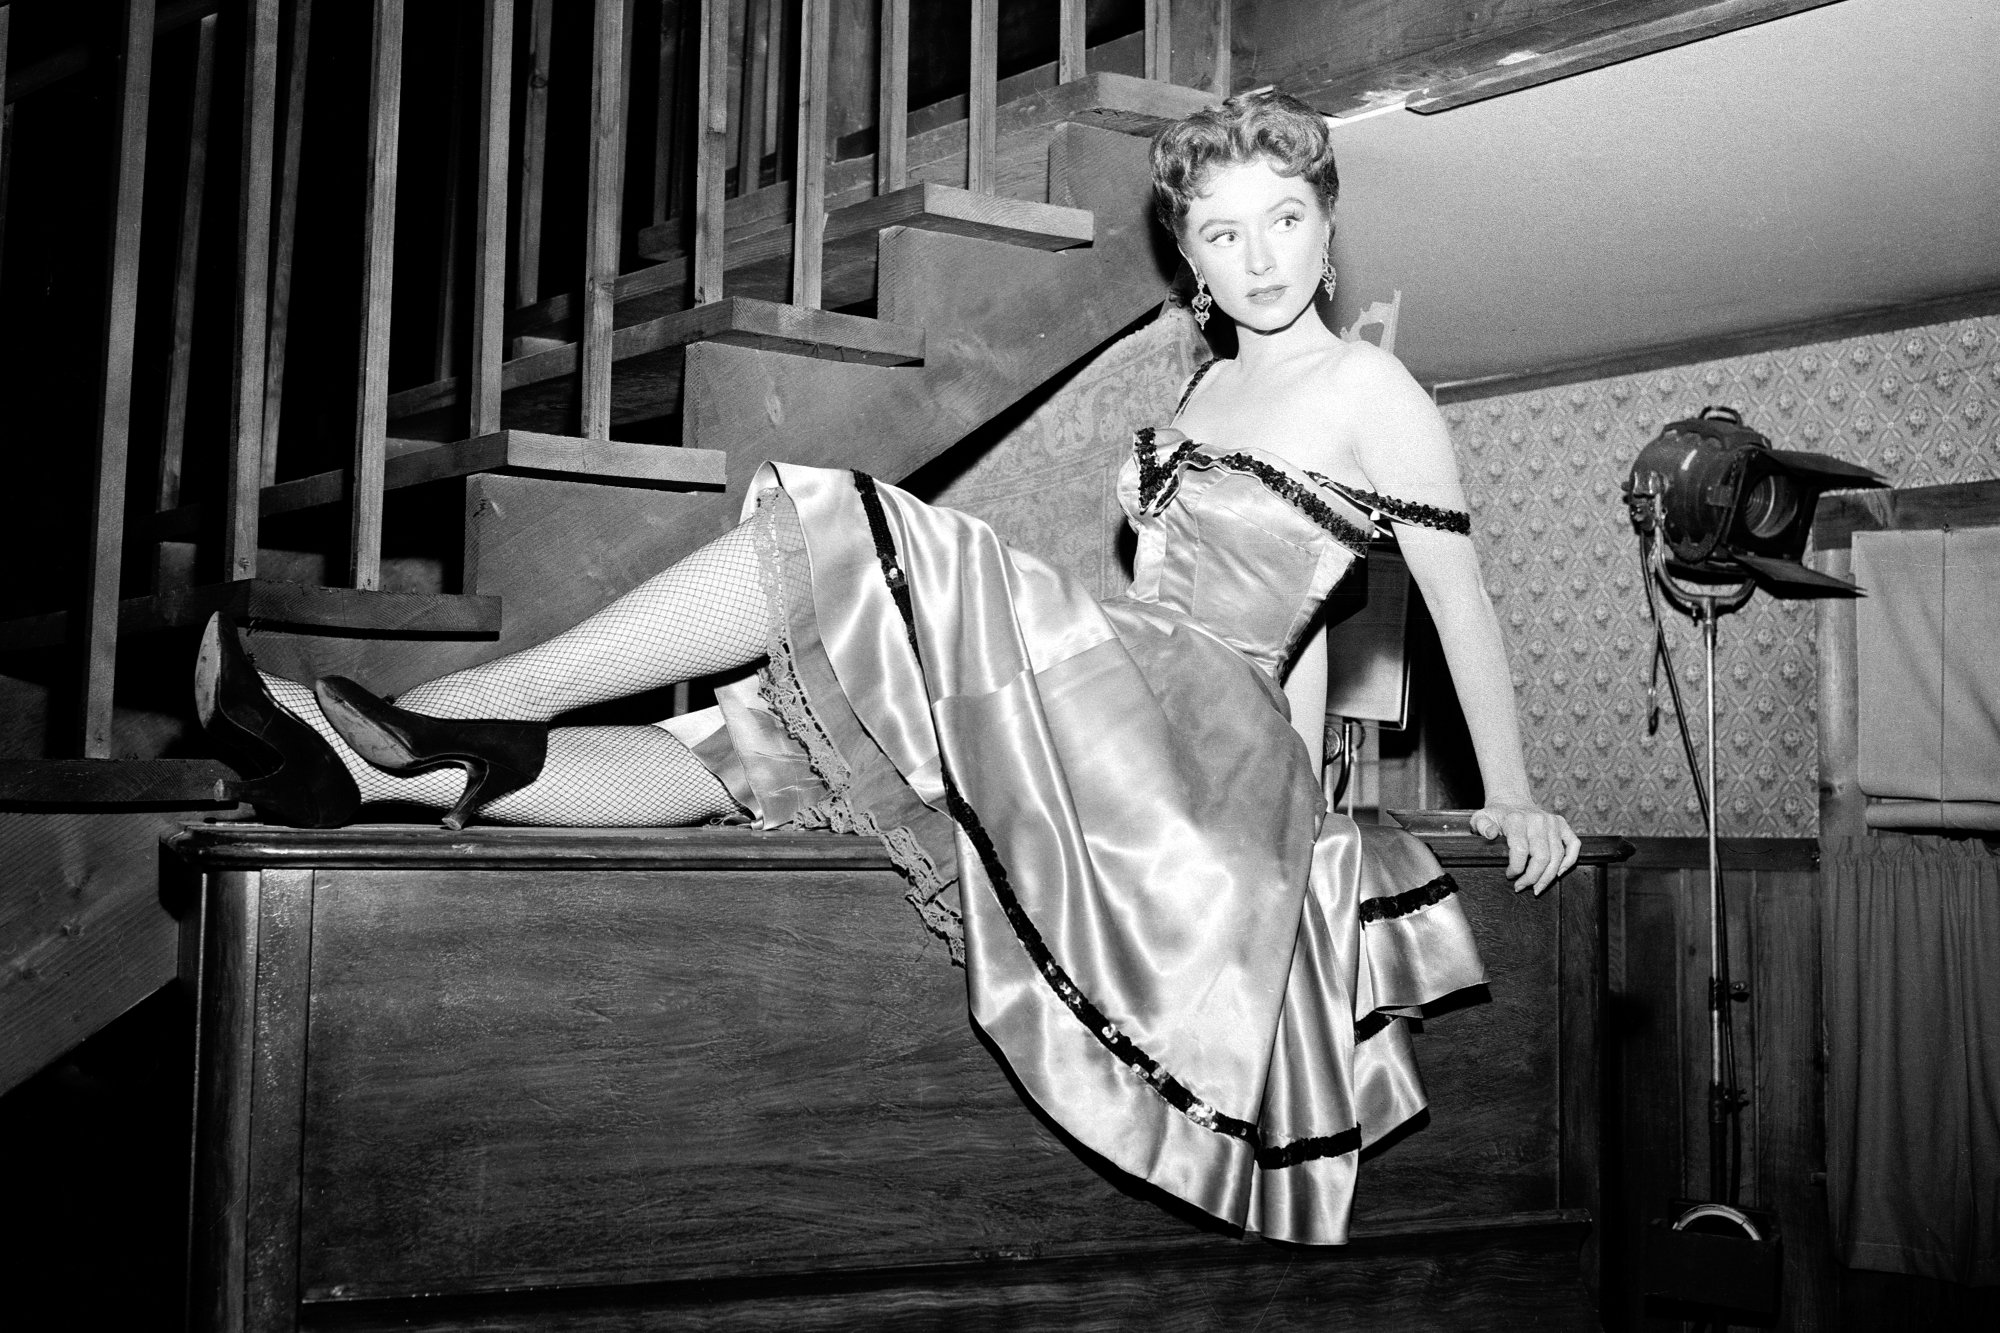 'Gunsmoke' Amanda Blake as Miss Kitty Russell in a black-and-white picture leaning back on the top of a piano in front of a staircase